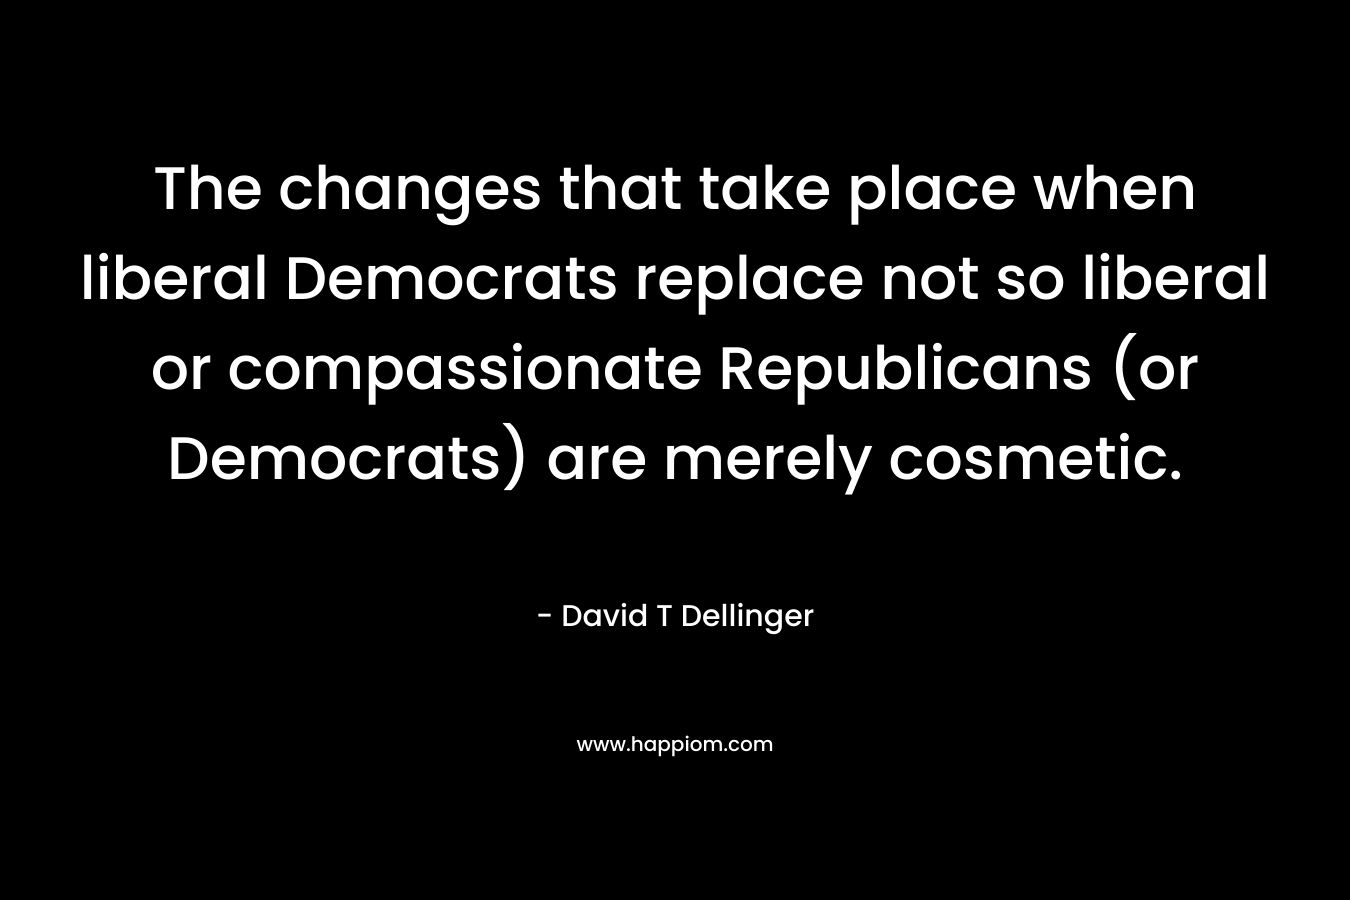 The changes that take place when liberal Democrats replace not so liberal or compassionate Republicans (or Democrats) are merely cosmetic.  – David T Dellinger